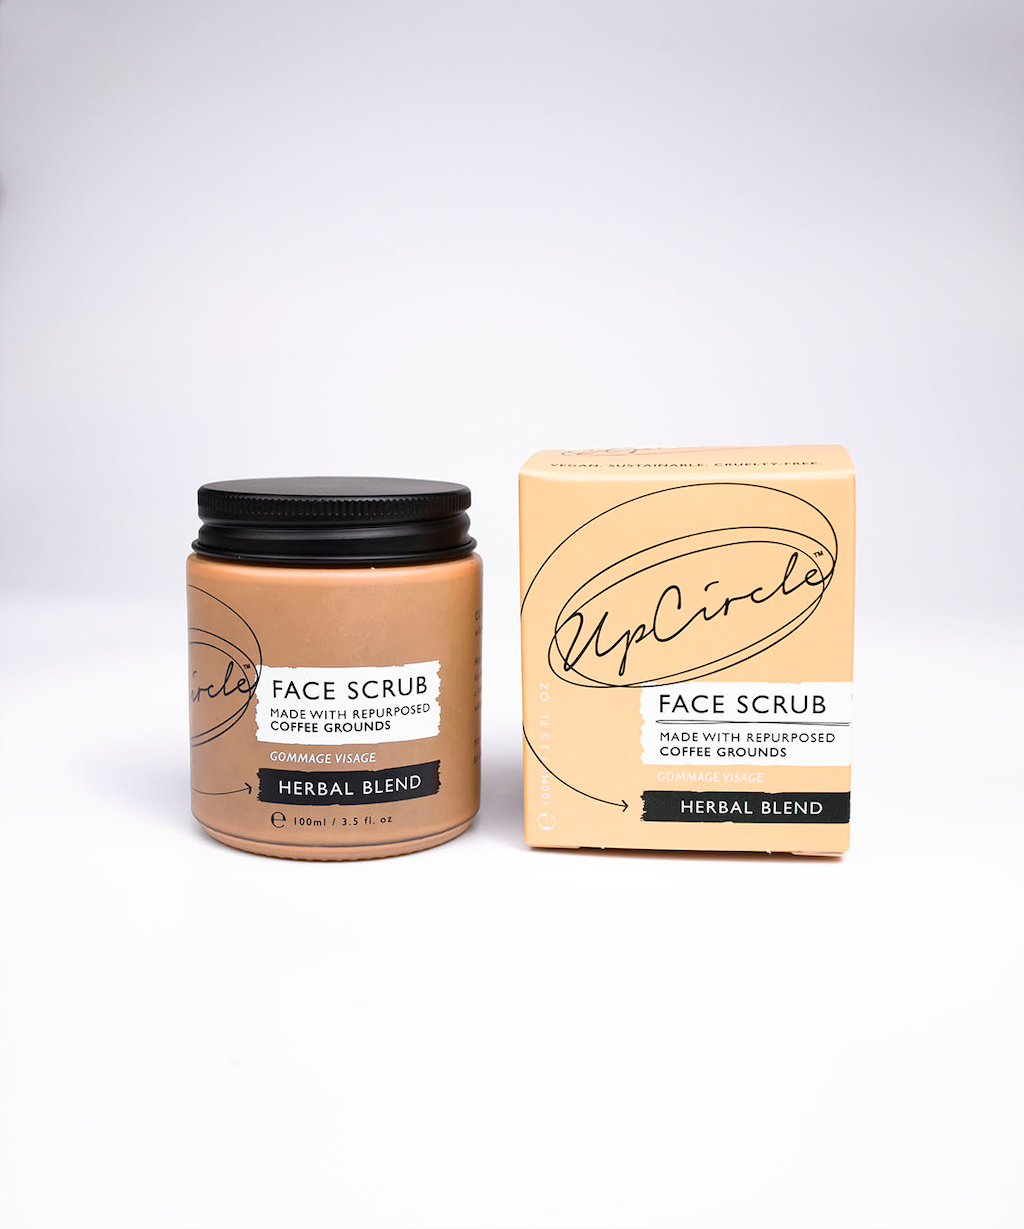 upcircle skincare herbal blend coffee face scrub on a white background. on the left is the glass jar and the box is on the right